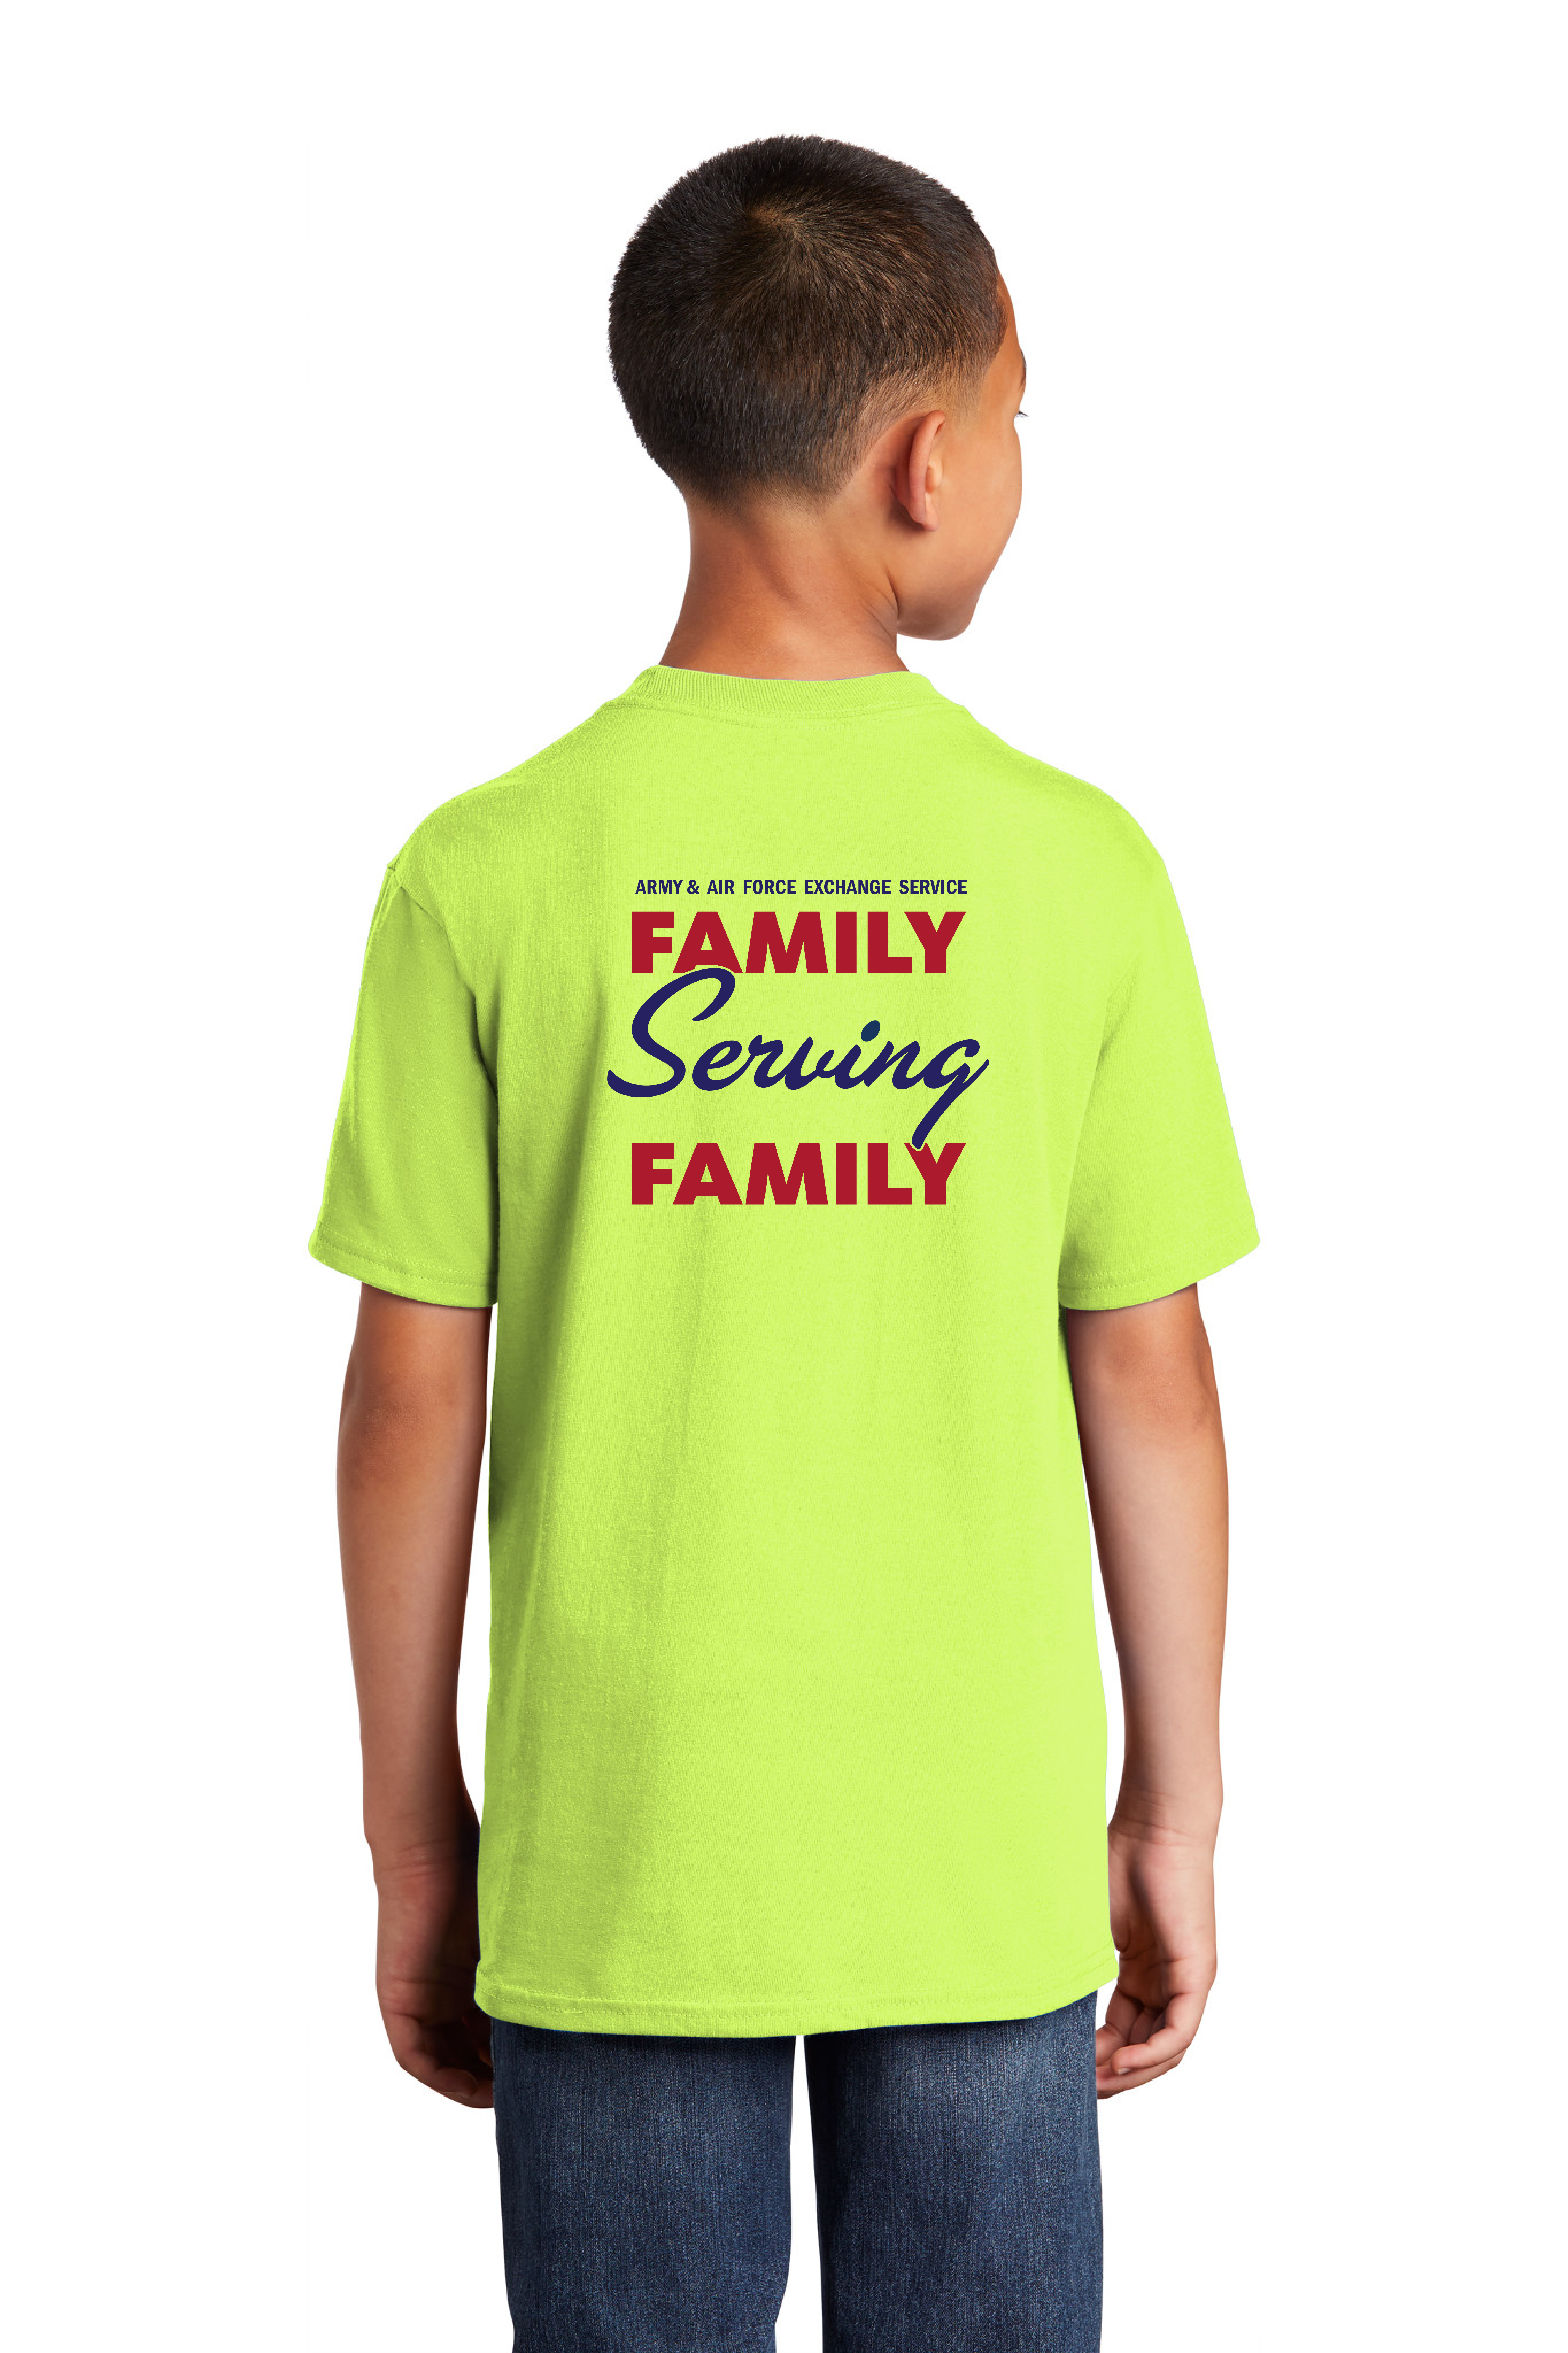 aafes-pride-youth-t-shirt-fb-240503-png.png